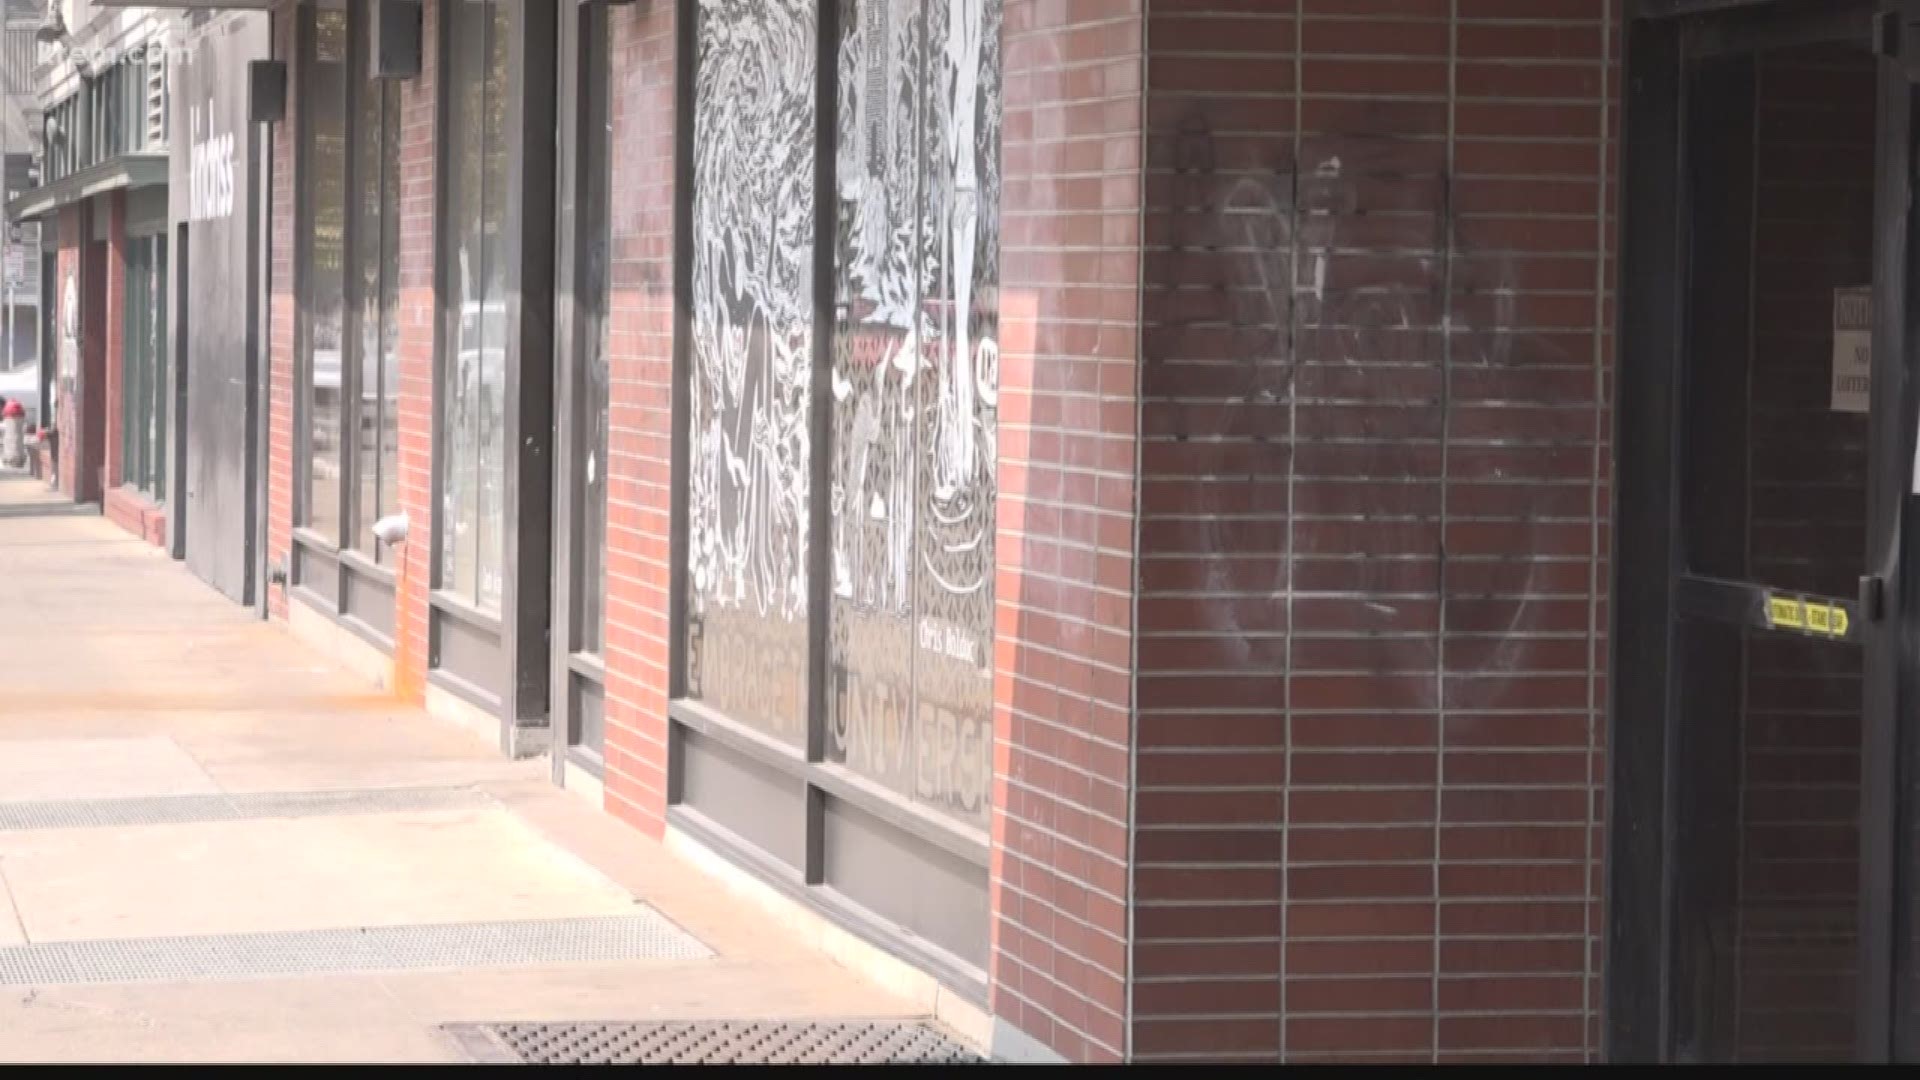 KREM Reporter Amanda Roley explores a proposed program that would offer rebates for money spent on security camera systems and other security improvements to downtown properties.